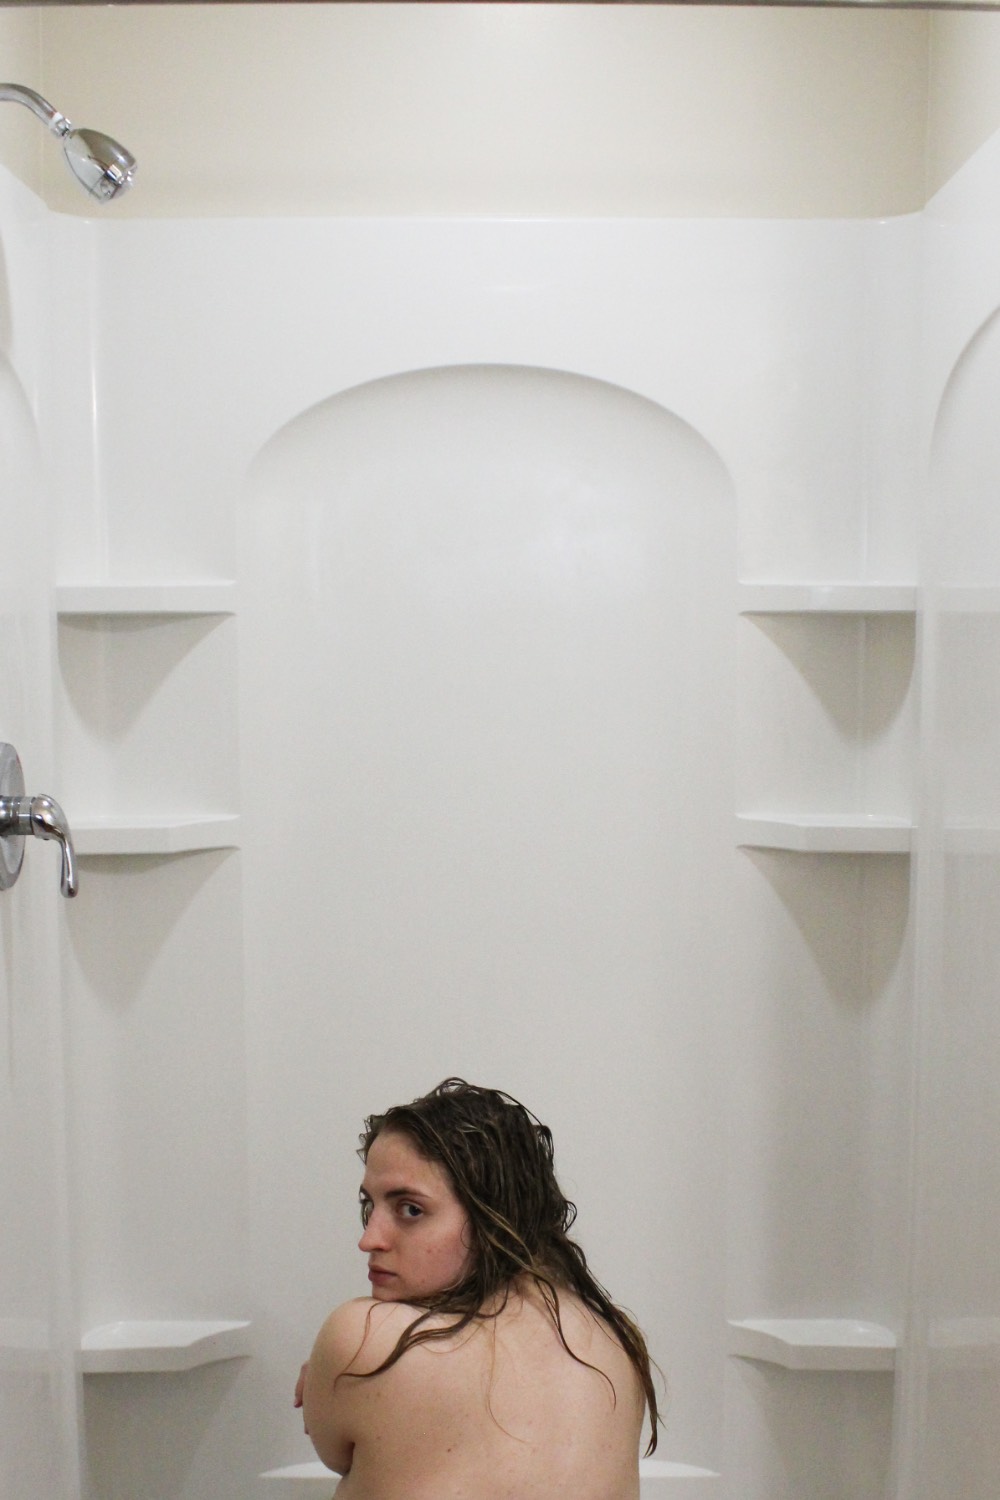 Color photo of a young woman sitting in a shower looking over her shoulder back at the camera